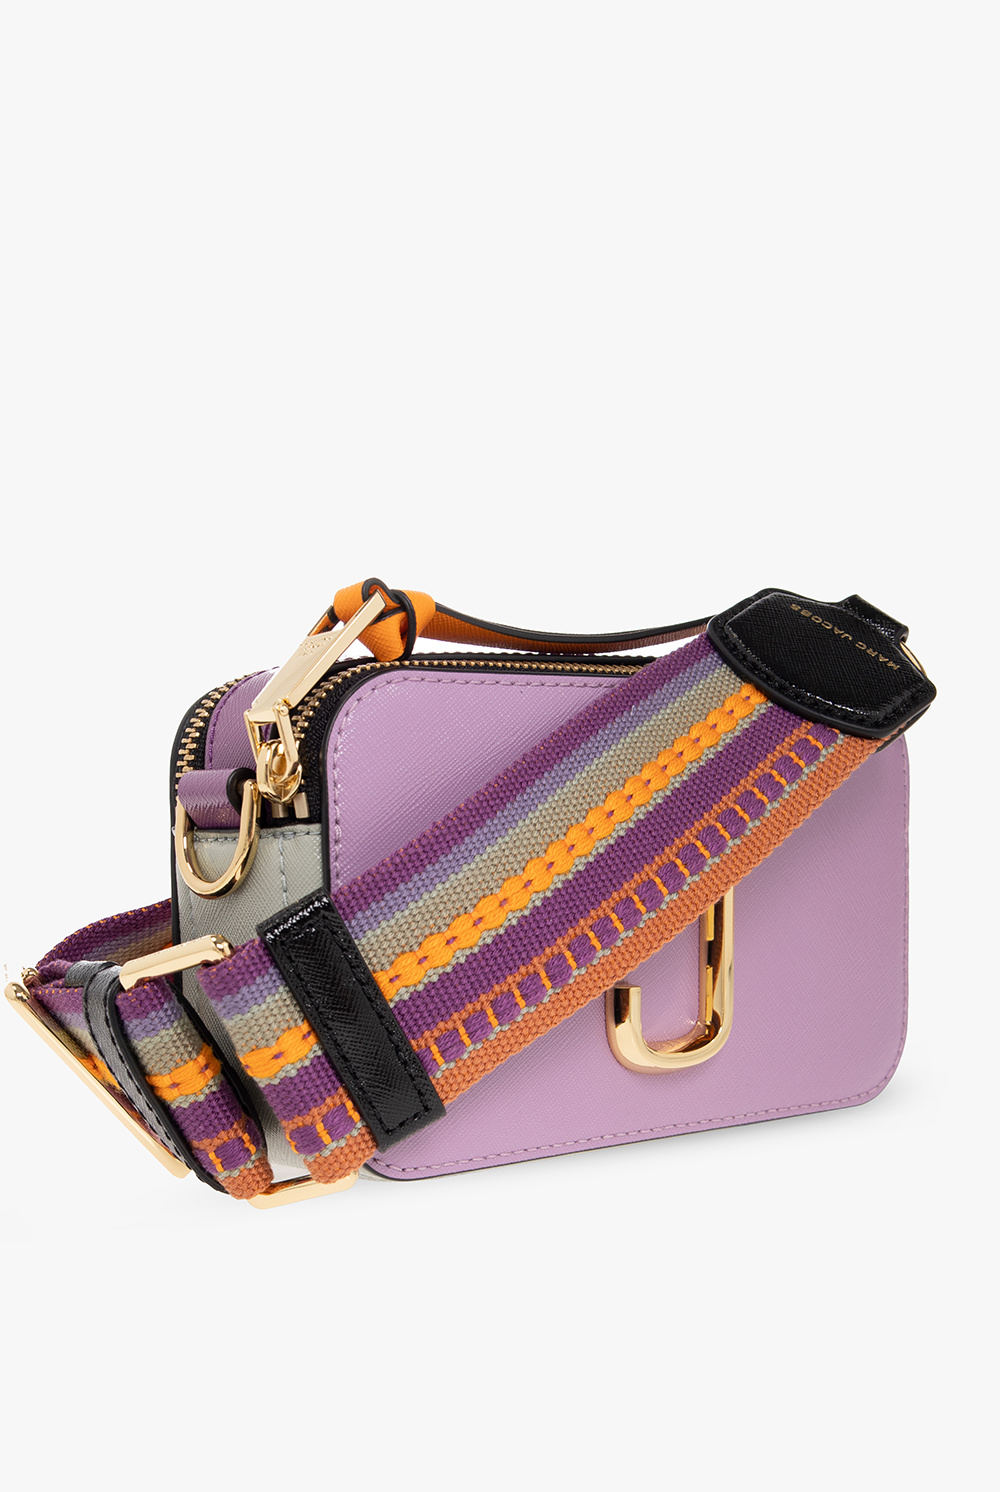 Marc Jacobs The Snapshot Bag Colour: Multicoloured, Size: One Size